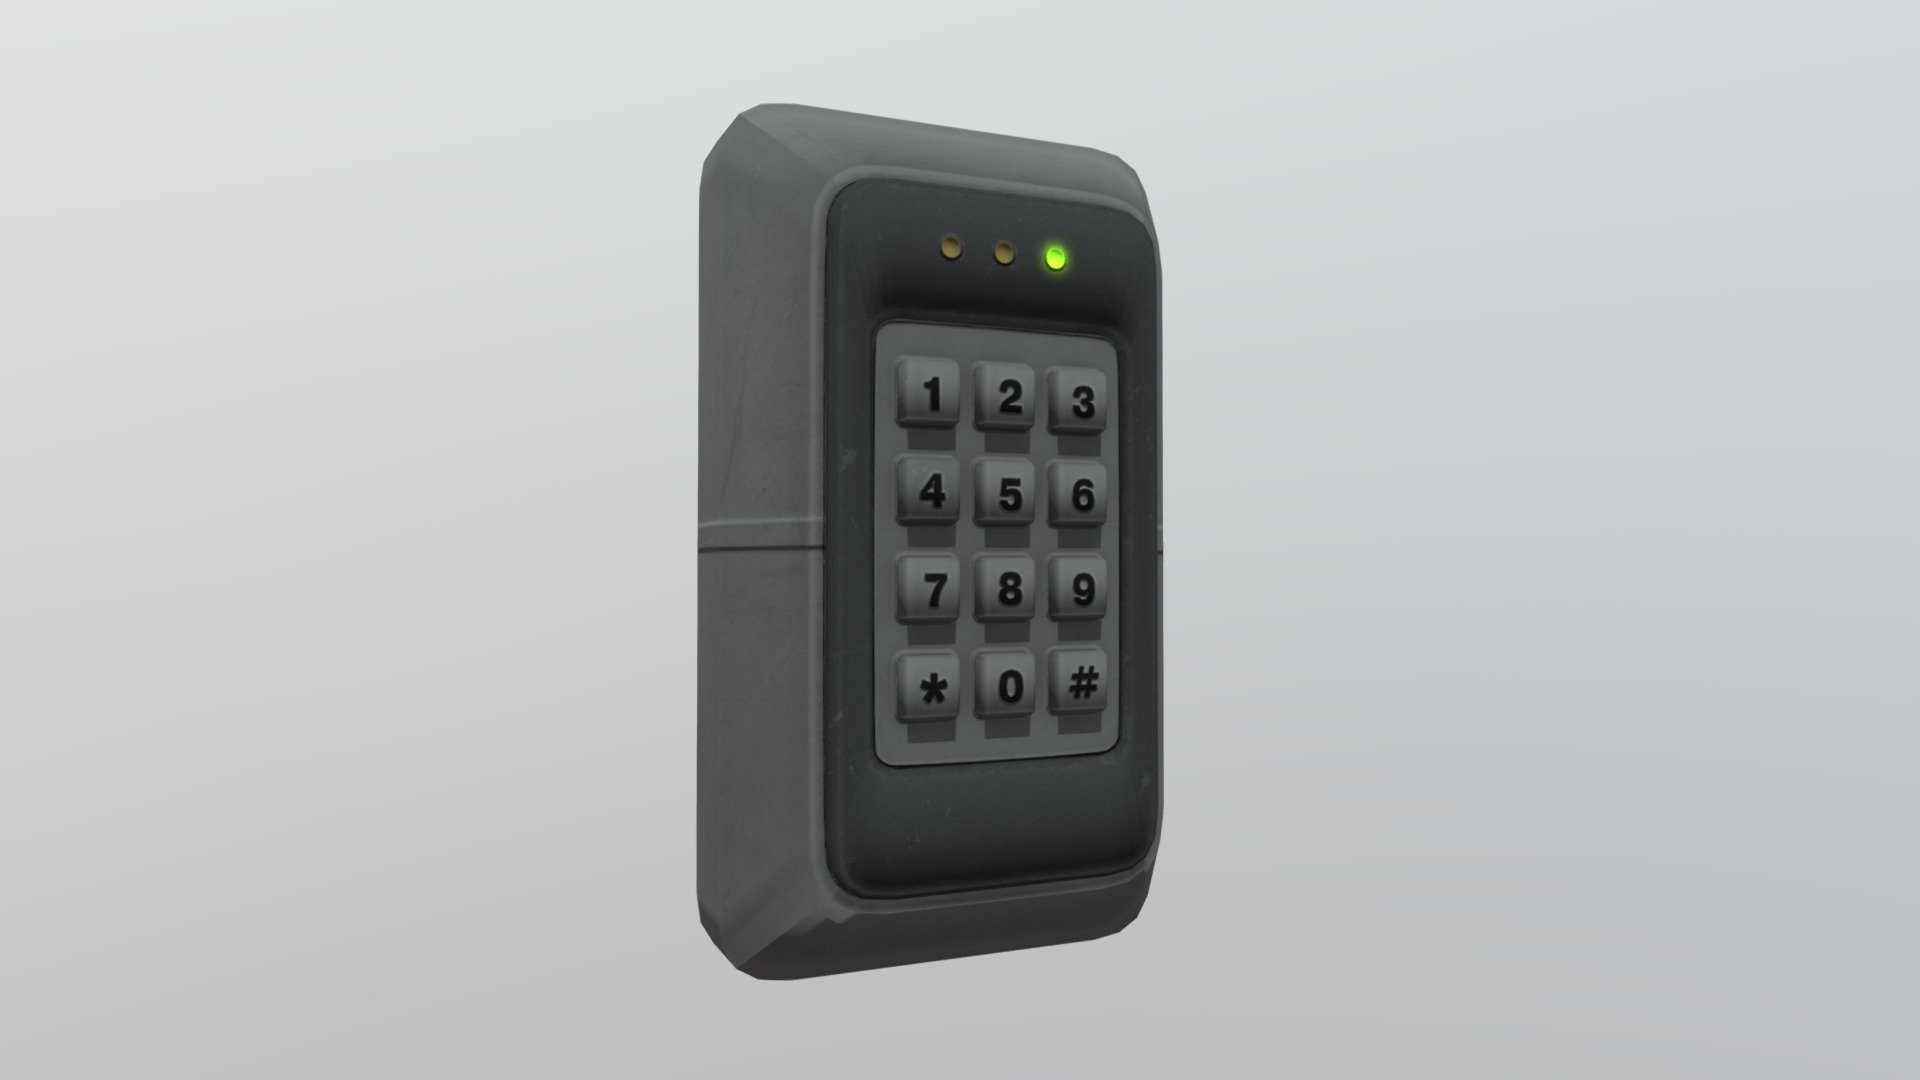 3D Smart Lock
The pack has highly detailed lock ready for use in your project. Just drag and drop prefabs into your scene and achieve beautiful results in no time. Available formats FBX, 3DS Max 2017



We are here to empower the creators. Please contact us via the [Contact US](https://aaanimators.com/#contact-area) page if you are having issues with our assets. 




The following document provides a highly detailed description of the asset:
[READ ME]()




**Mesh complexities:**


Lock_03 572 verts; 676 tris



Includes 1 set of textures with 3 materials:



● Diffuse

● Normal

● Specular - Smark Electronic Door Lock 03 - Buy Royalty Free 3D model by aaanimators 3d model